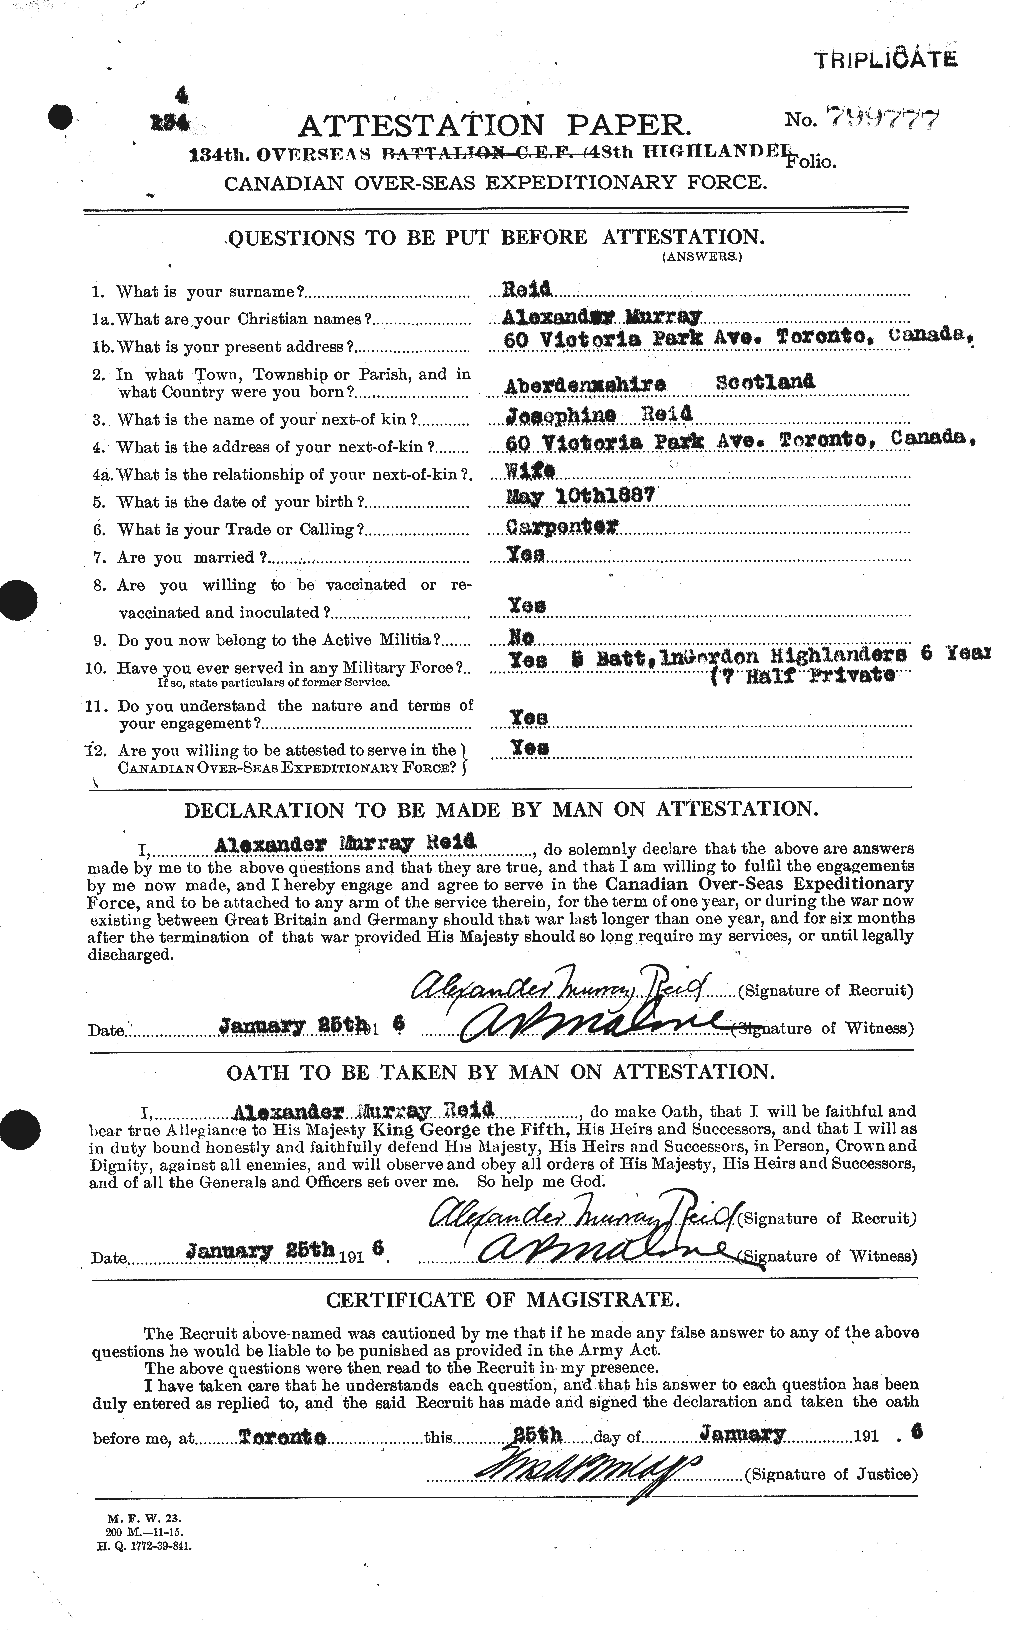 Personnel Records of the First World War - CEF 597784a